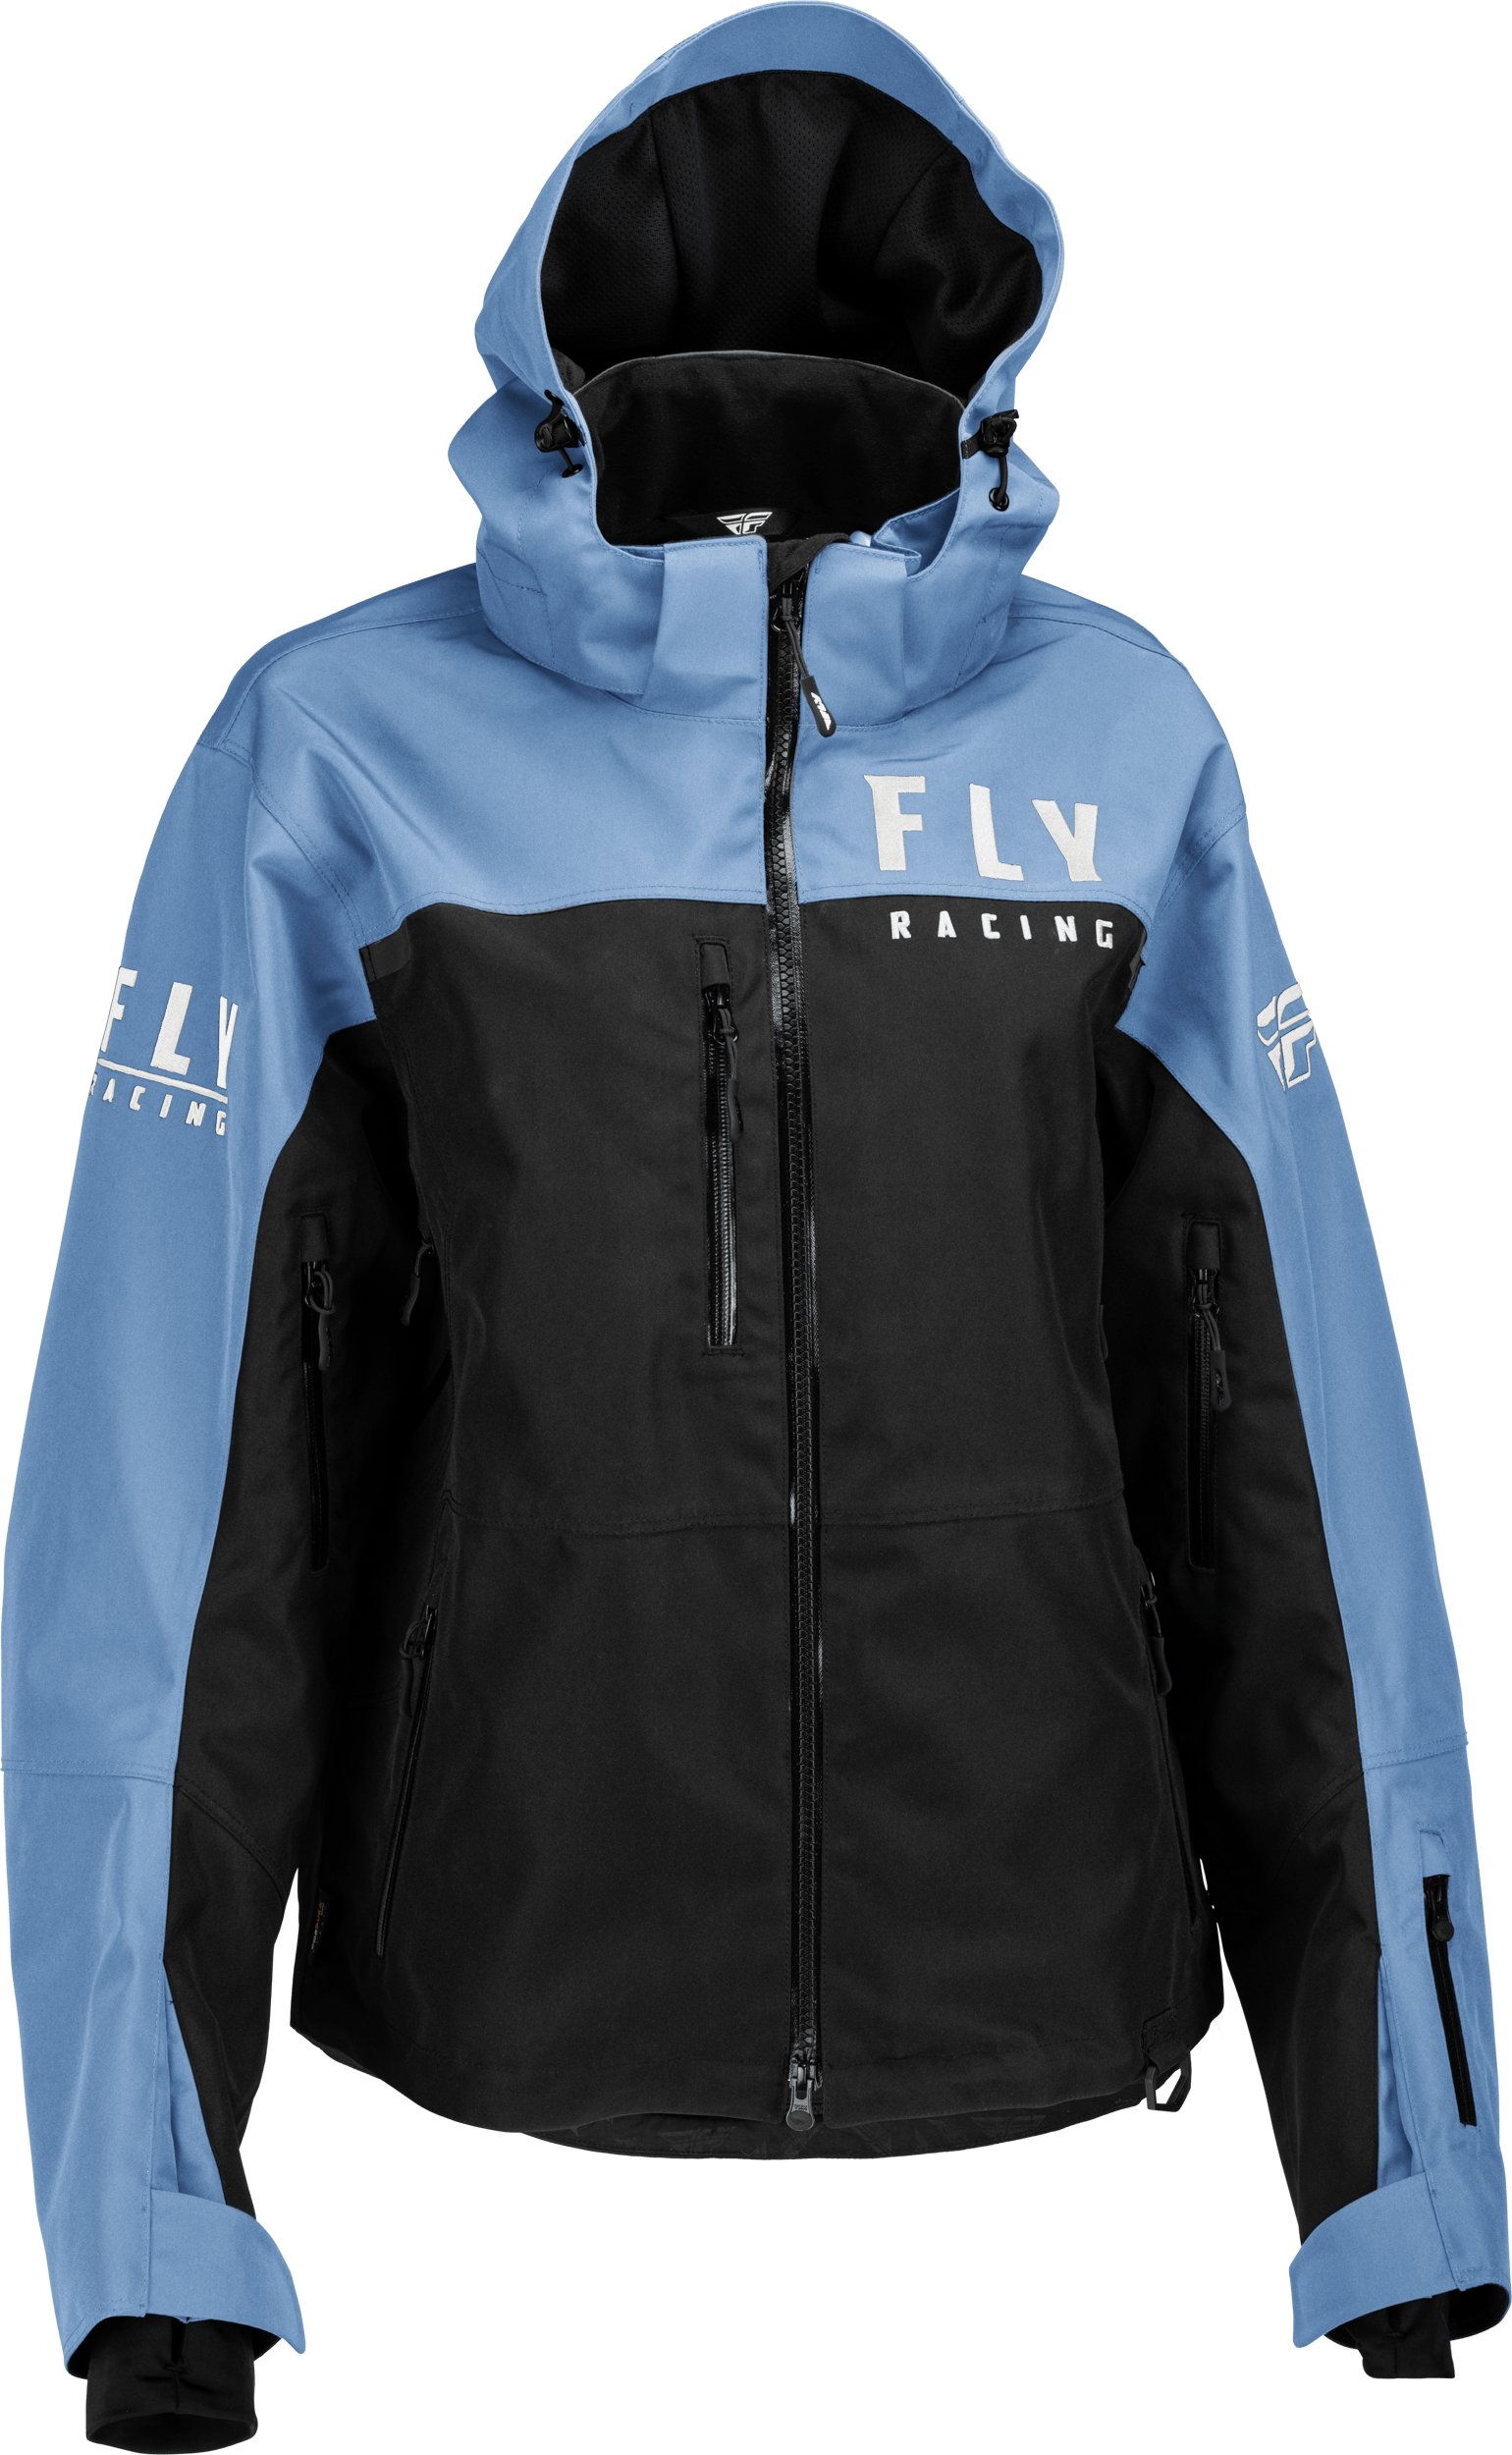 Western Powersports Jacket Black/Blue / 2X Women's Carbon Jacket By Fly Racing 470-45012X